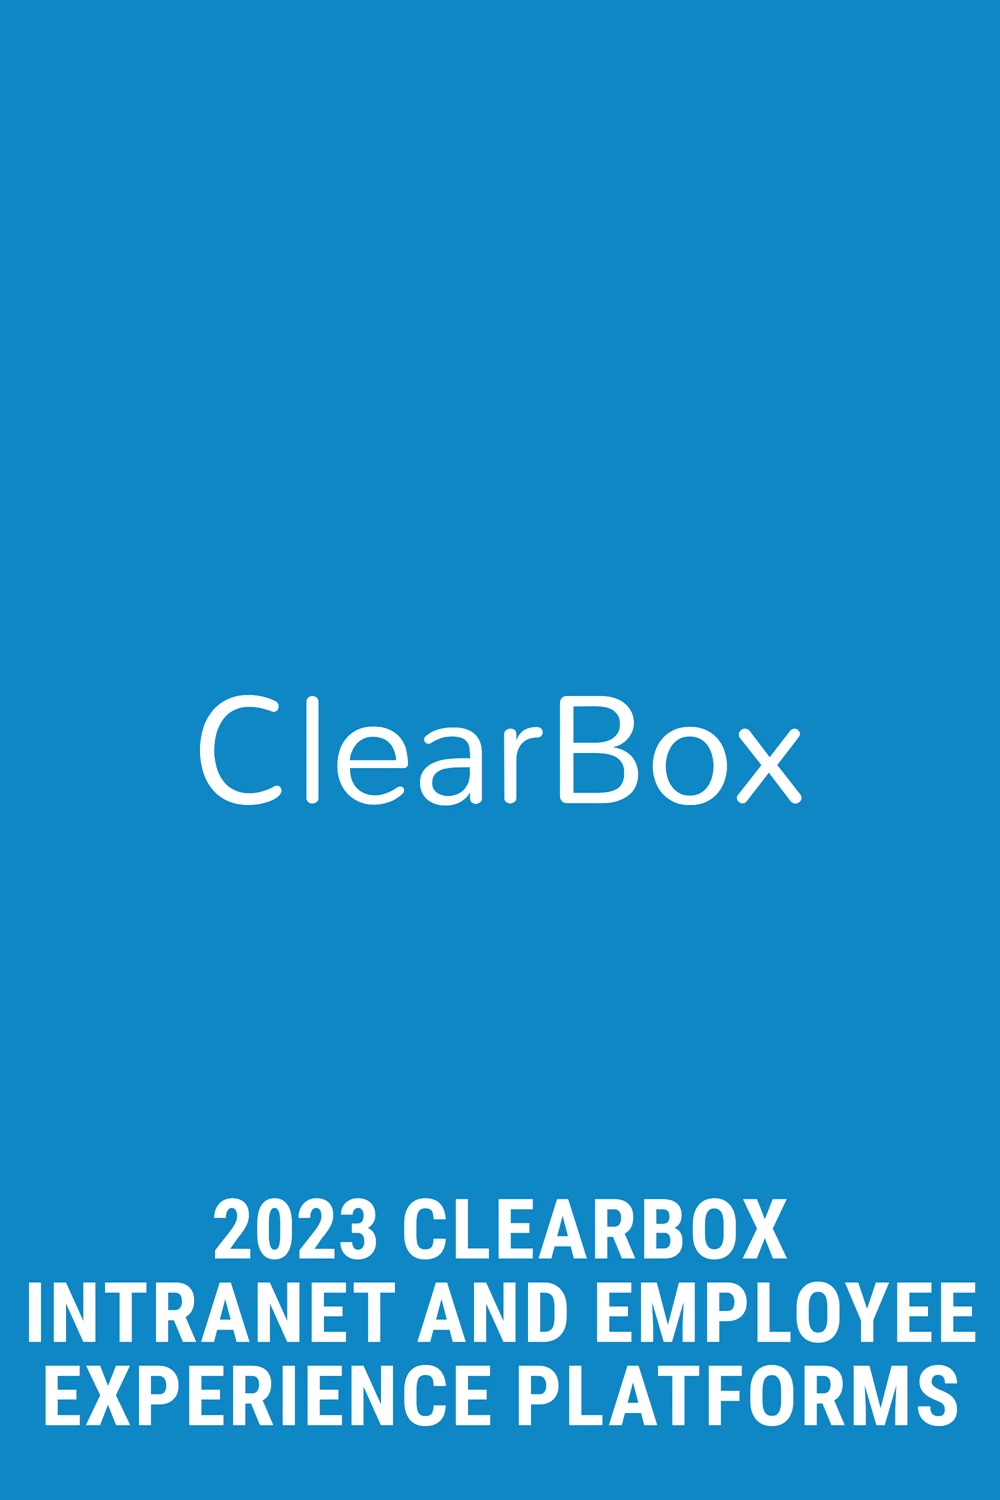 'ClearBox Intranet and Employee Experience Platforms 2023' report flat pages